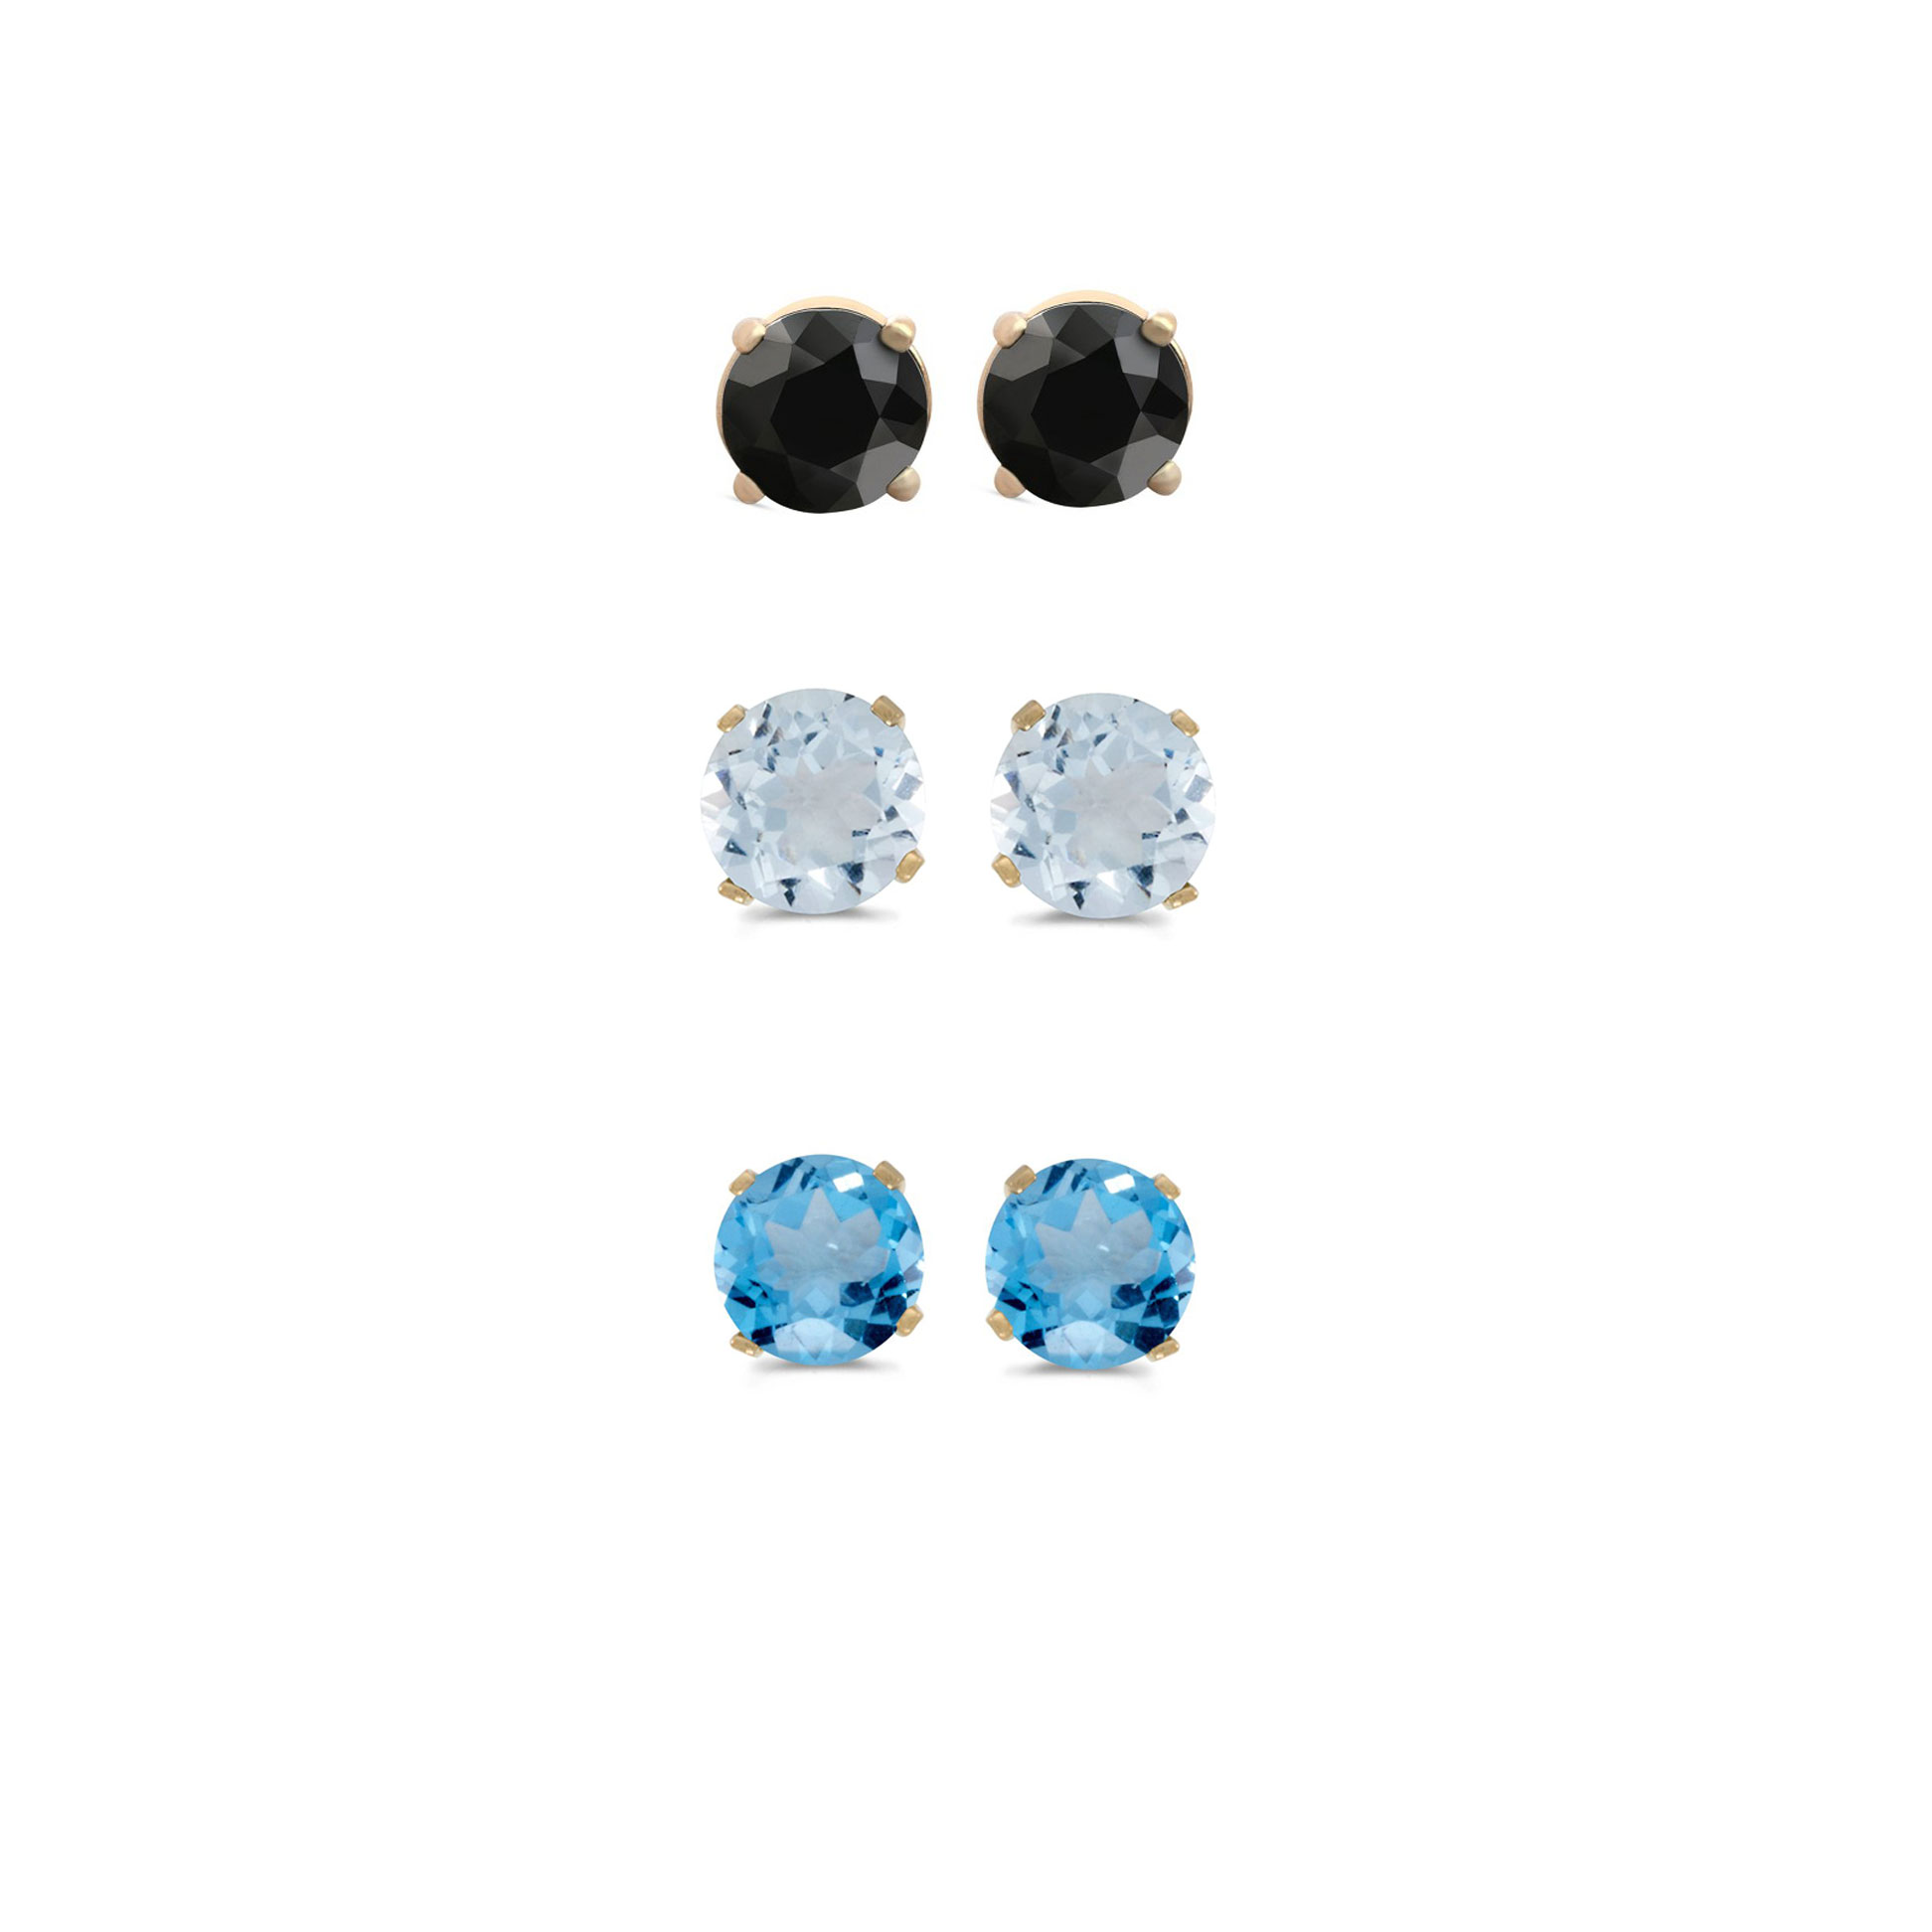 BJ Jewelry 24k Yellow Gold Plated 3Ct Created Black Sapphire, Aquamarine and Blue Topaz 3 Pair Round Stud Earrings